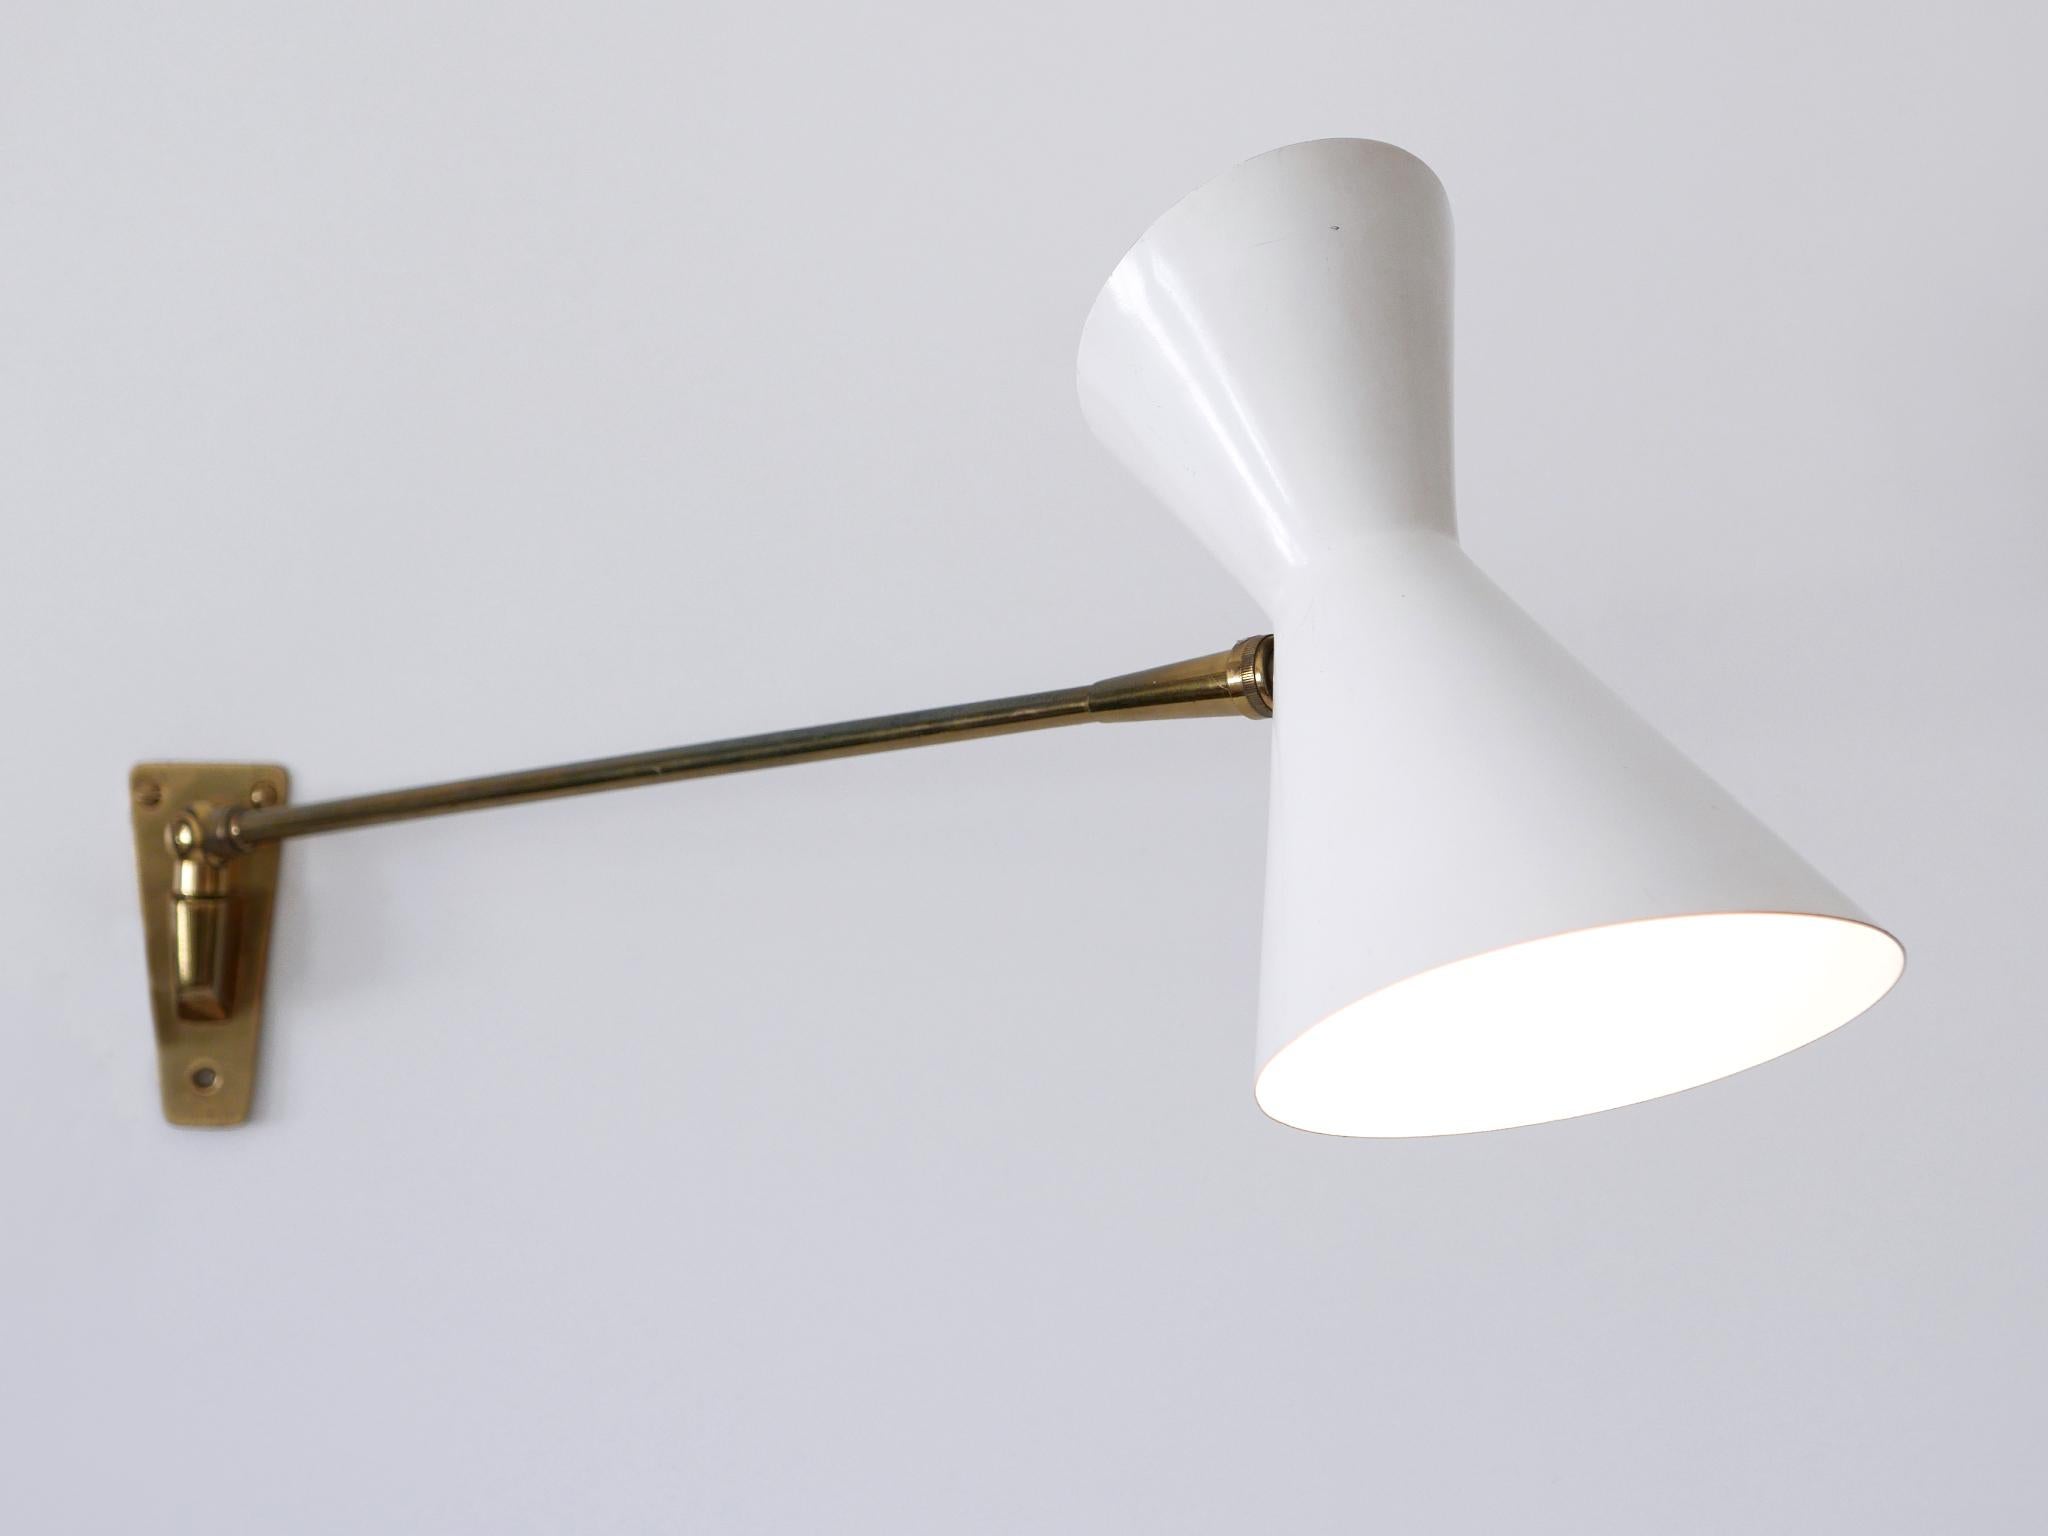 Swiss Elegant Mid Century Articulated Diabolo Wall Lamp by Belmag Switzerland 1950s For Sale